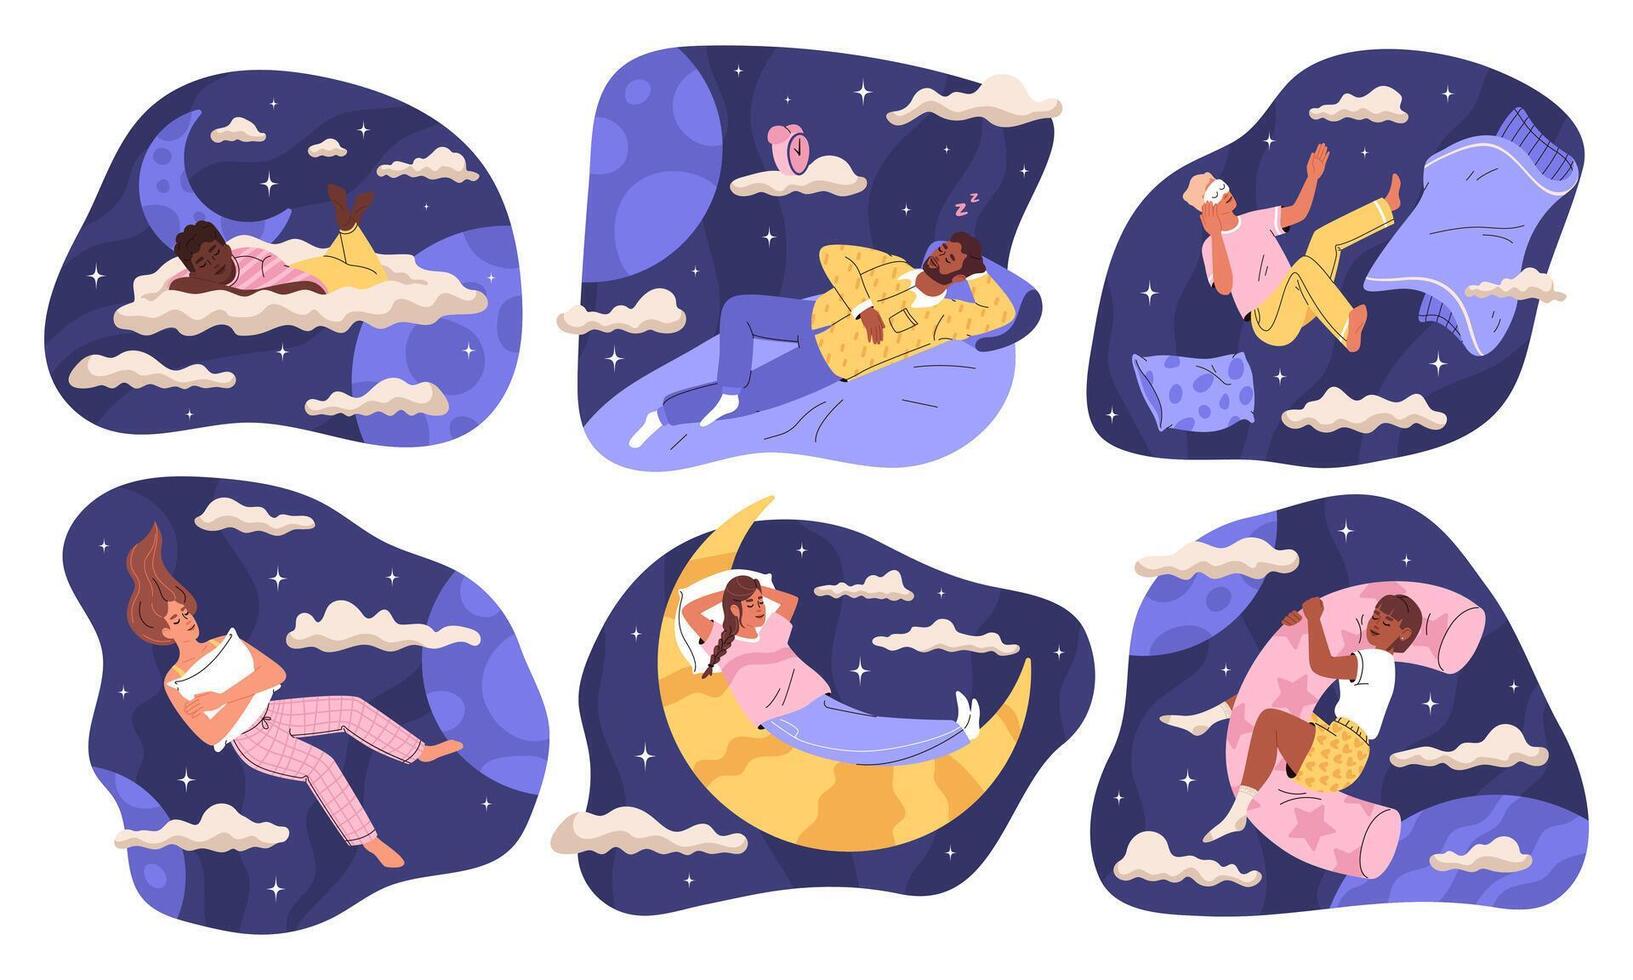 People sleep set. Concept of healthy sleep, dreams. Process of immersing person in sleep. illustration. vector